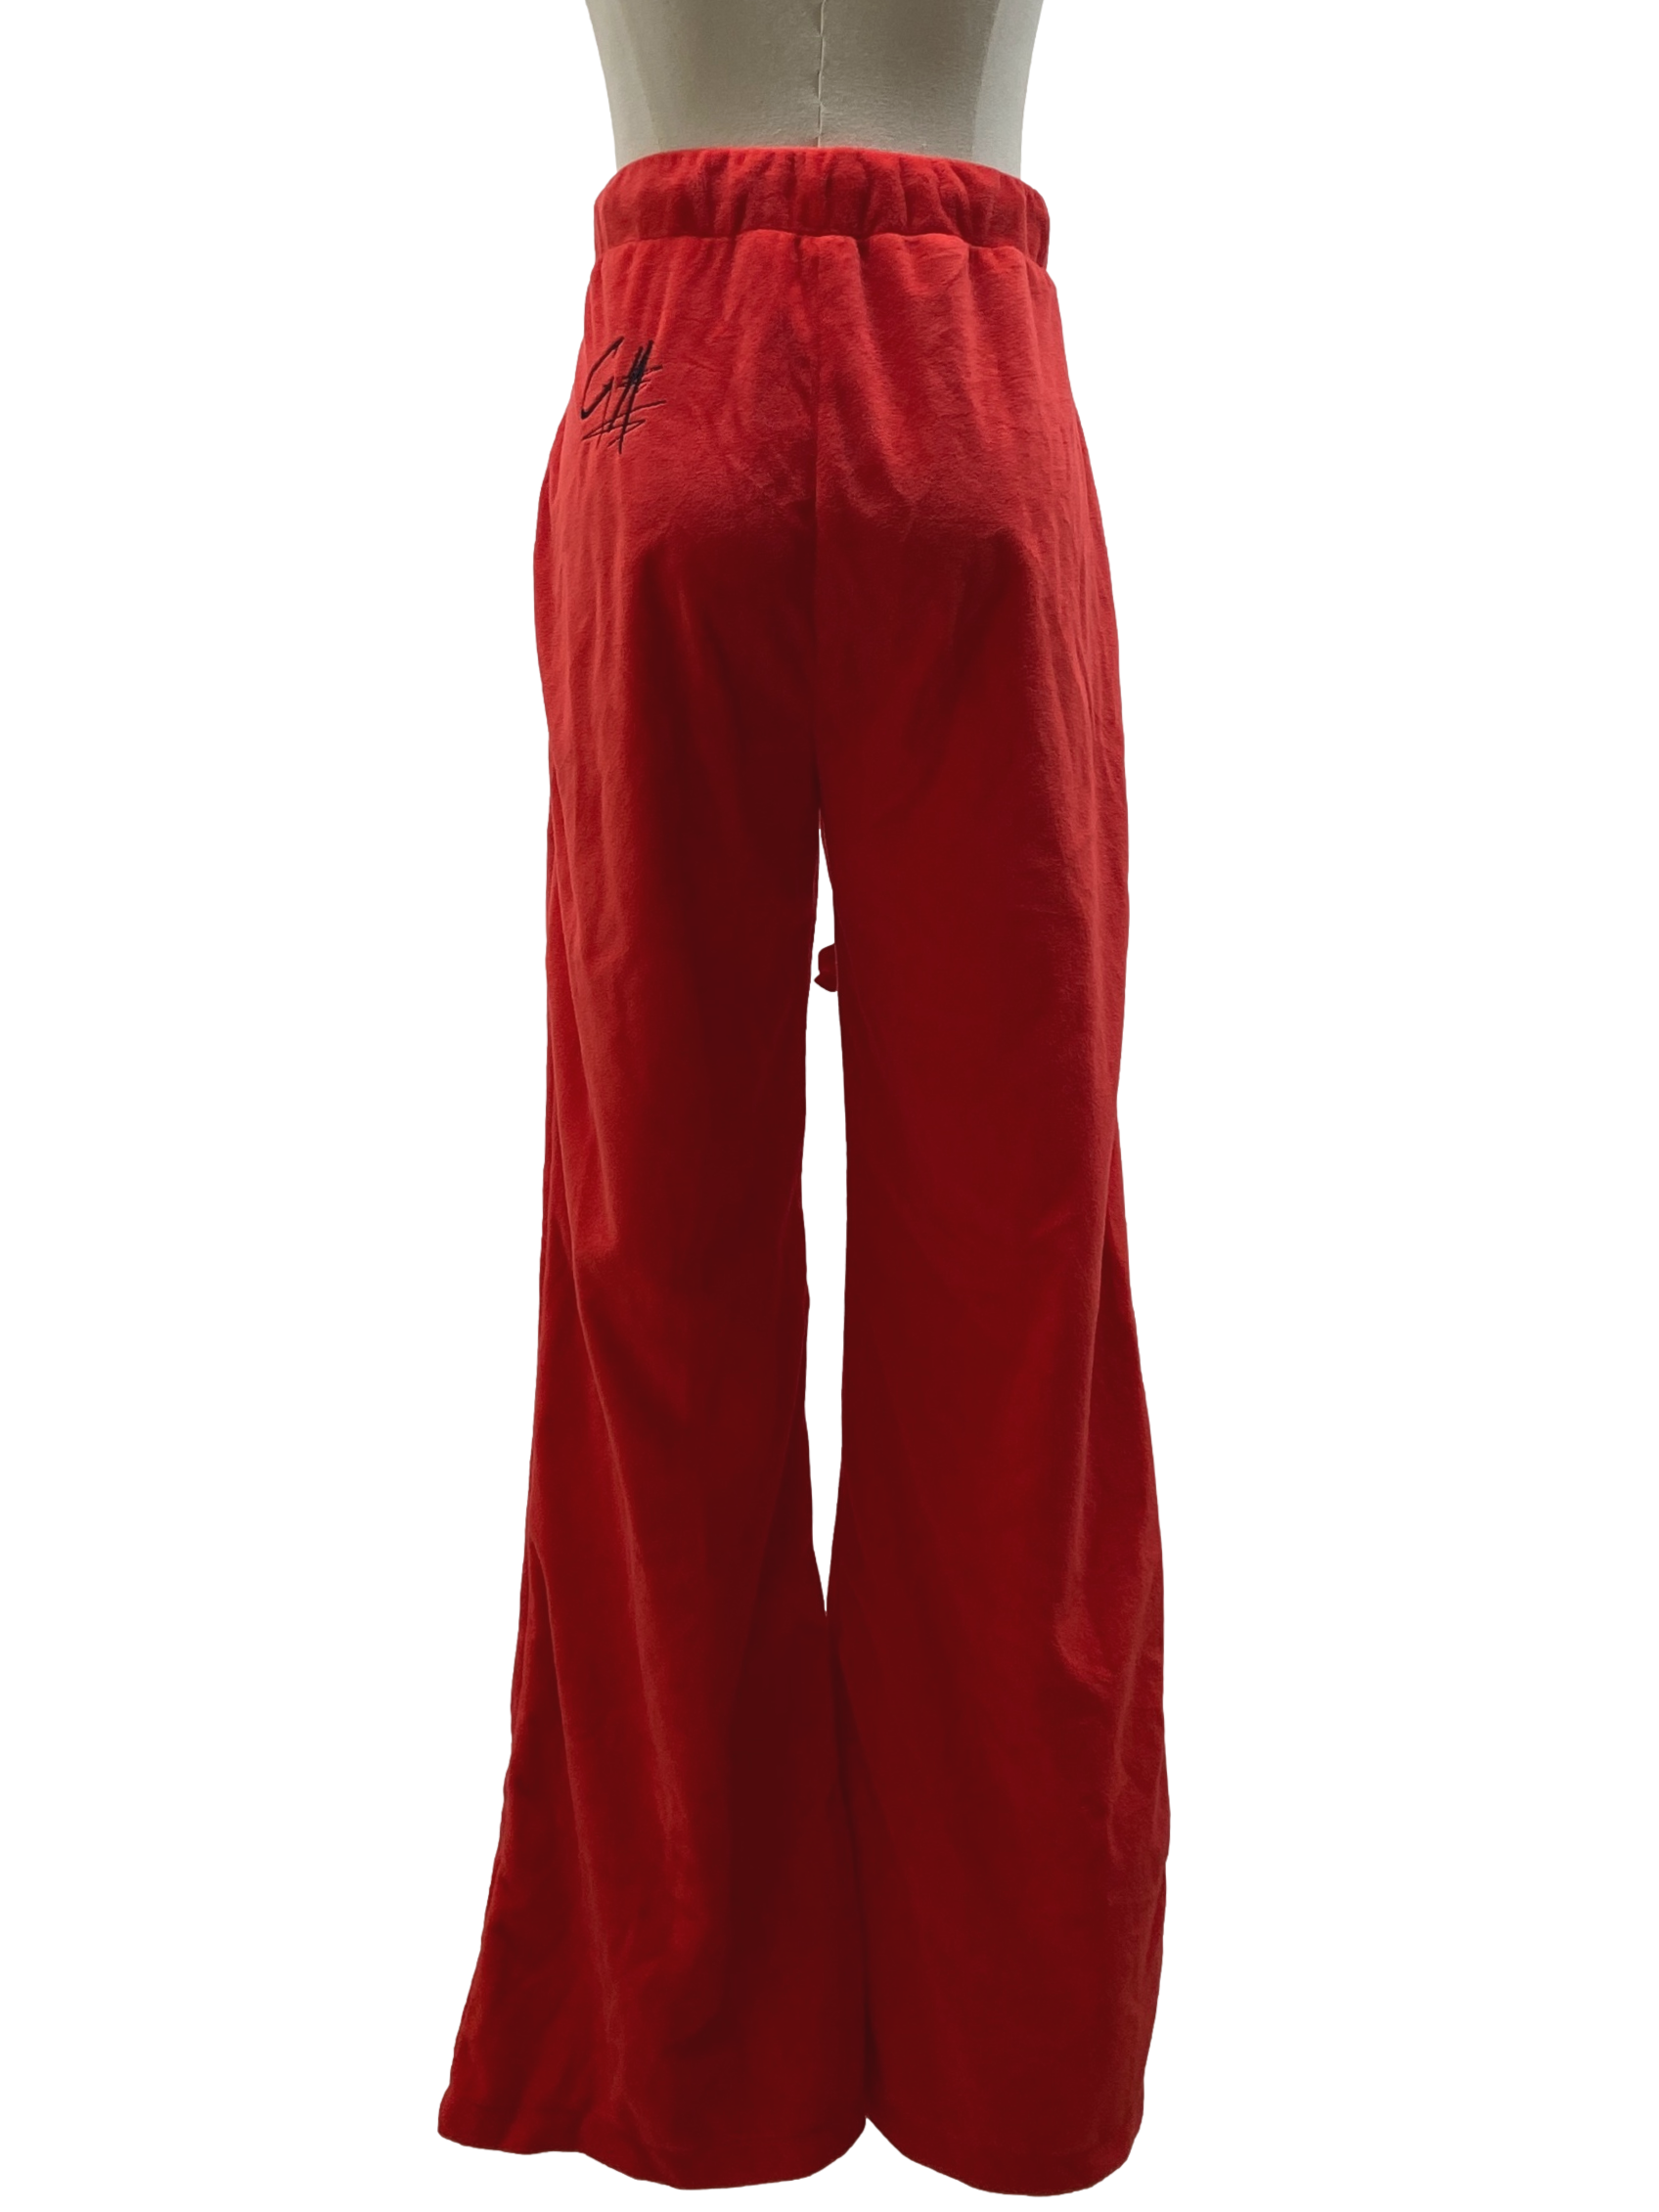 Candy Red Straight Pants